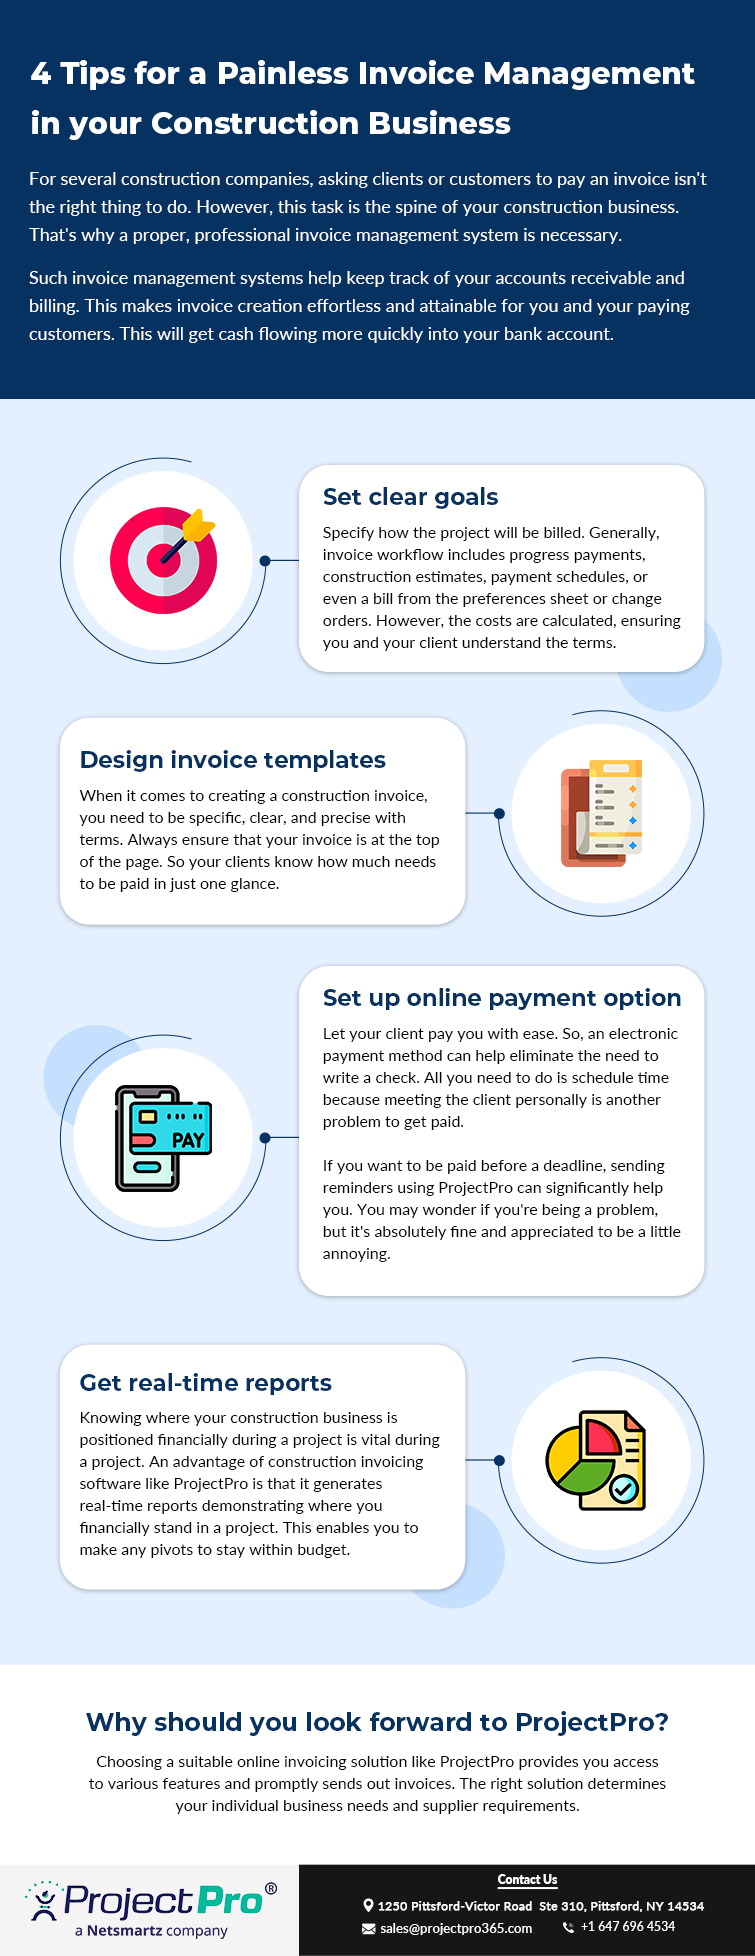 tips-for-invoice-management-in-construction-business-info